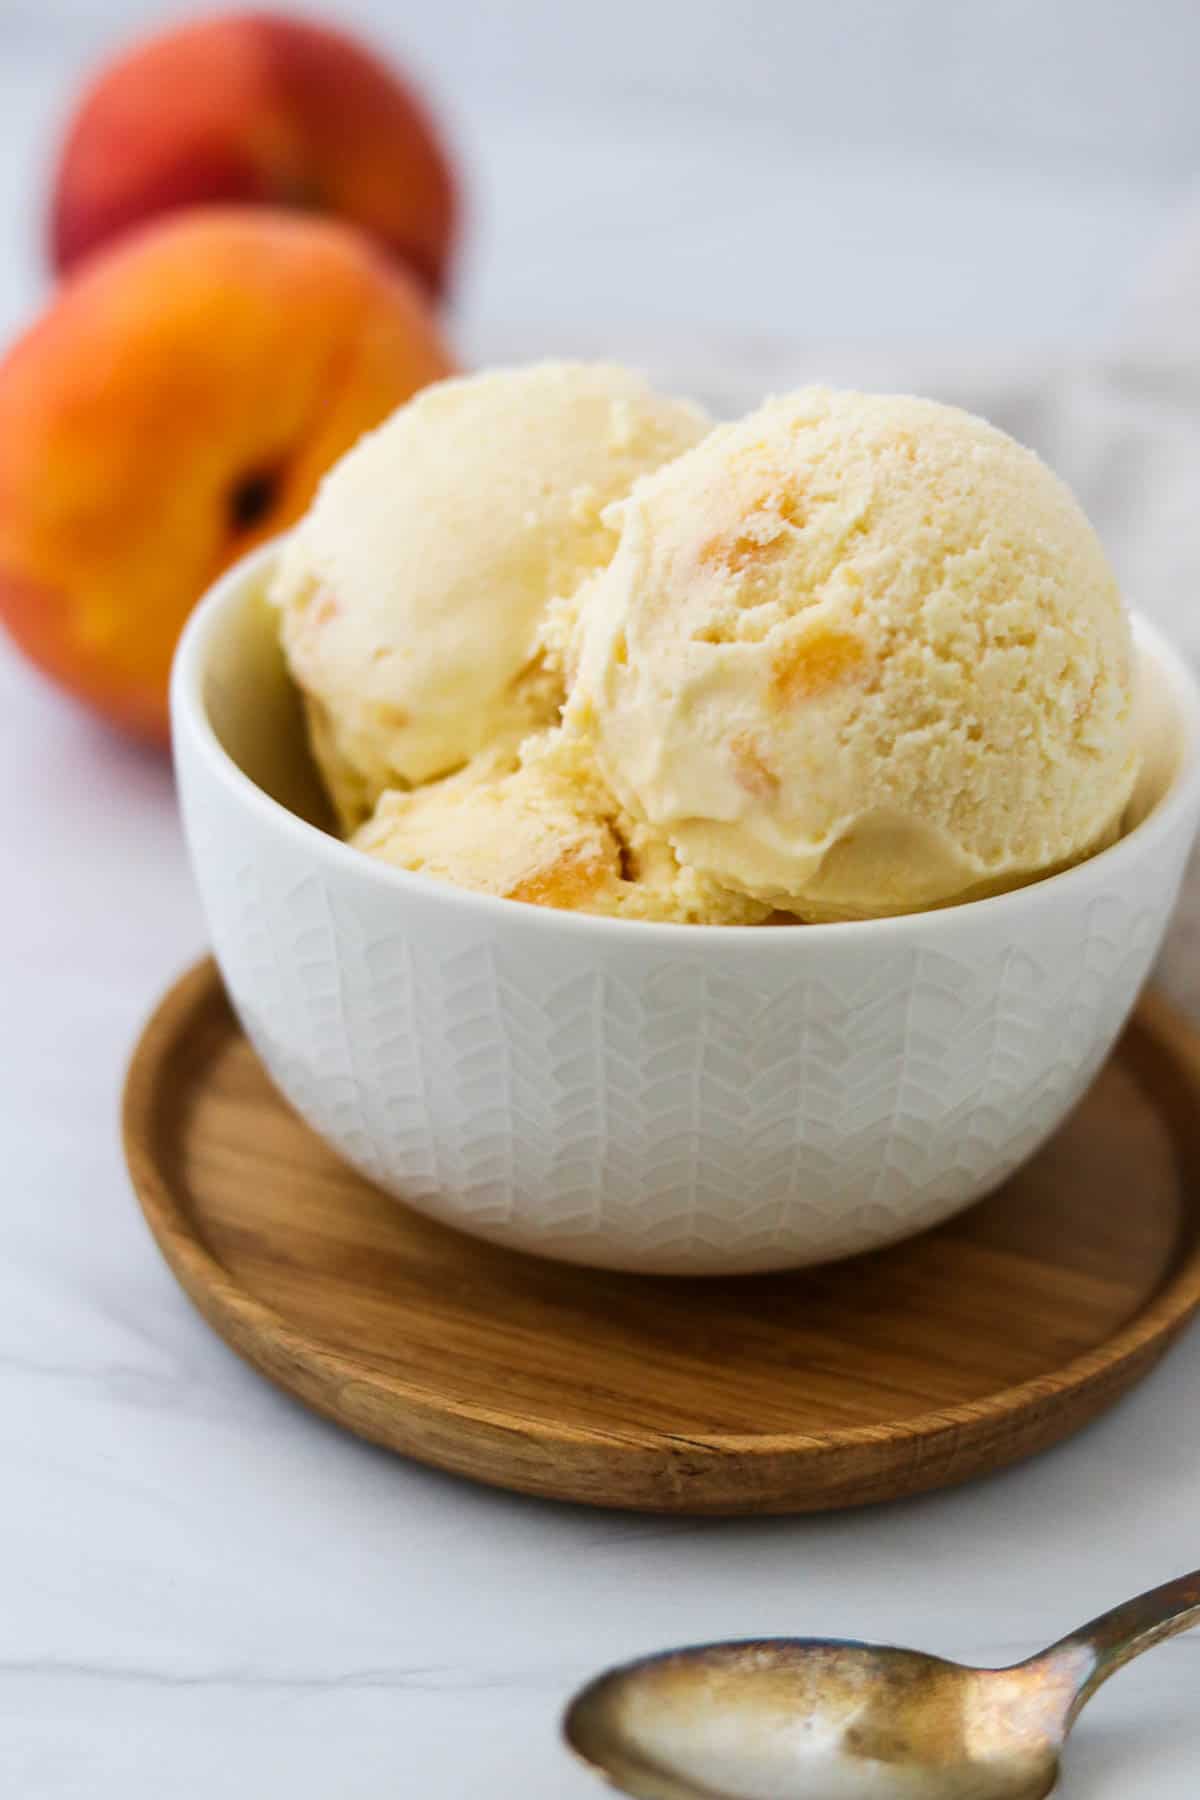 Peaches and Cream Ice Cream in a bowl next to a spoon and peaches.